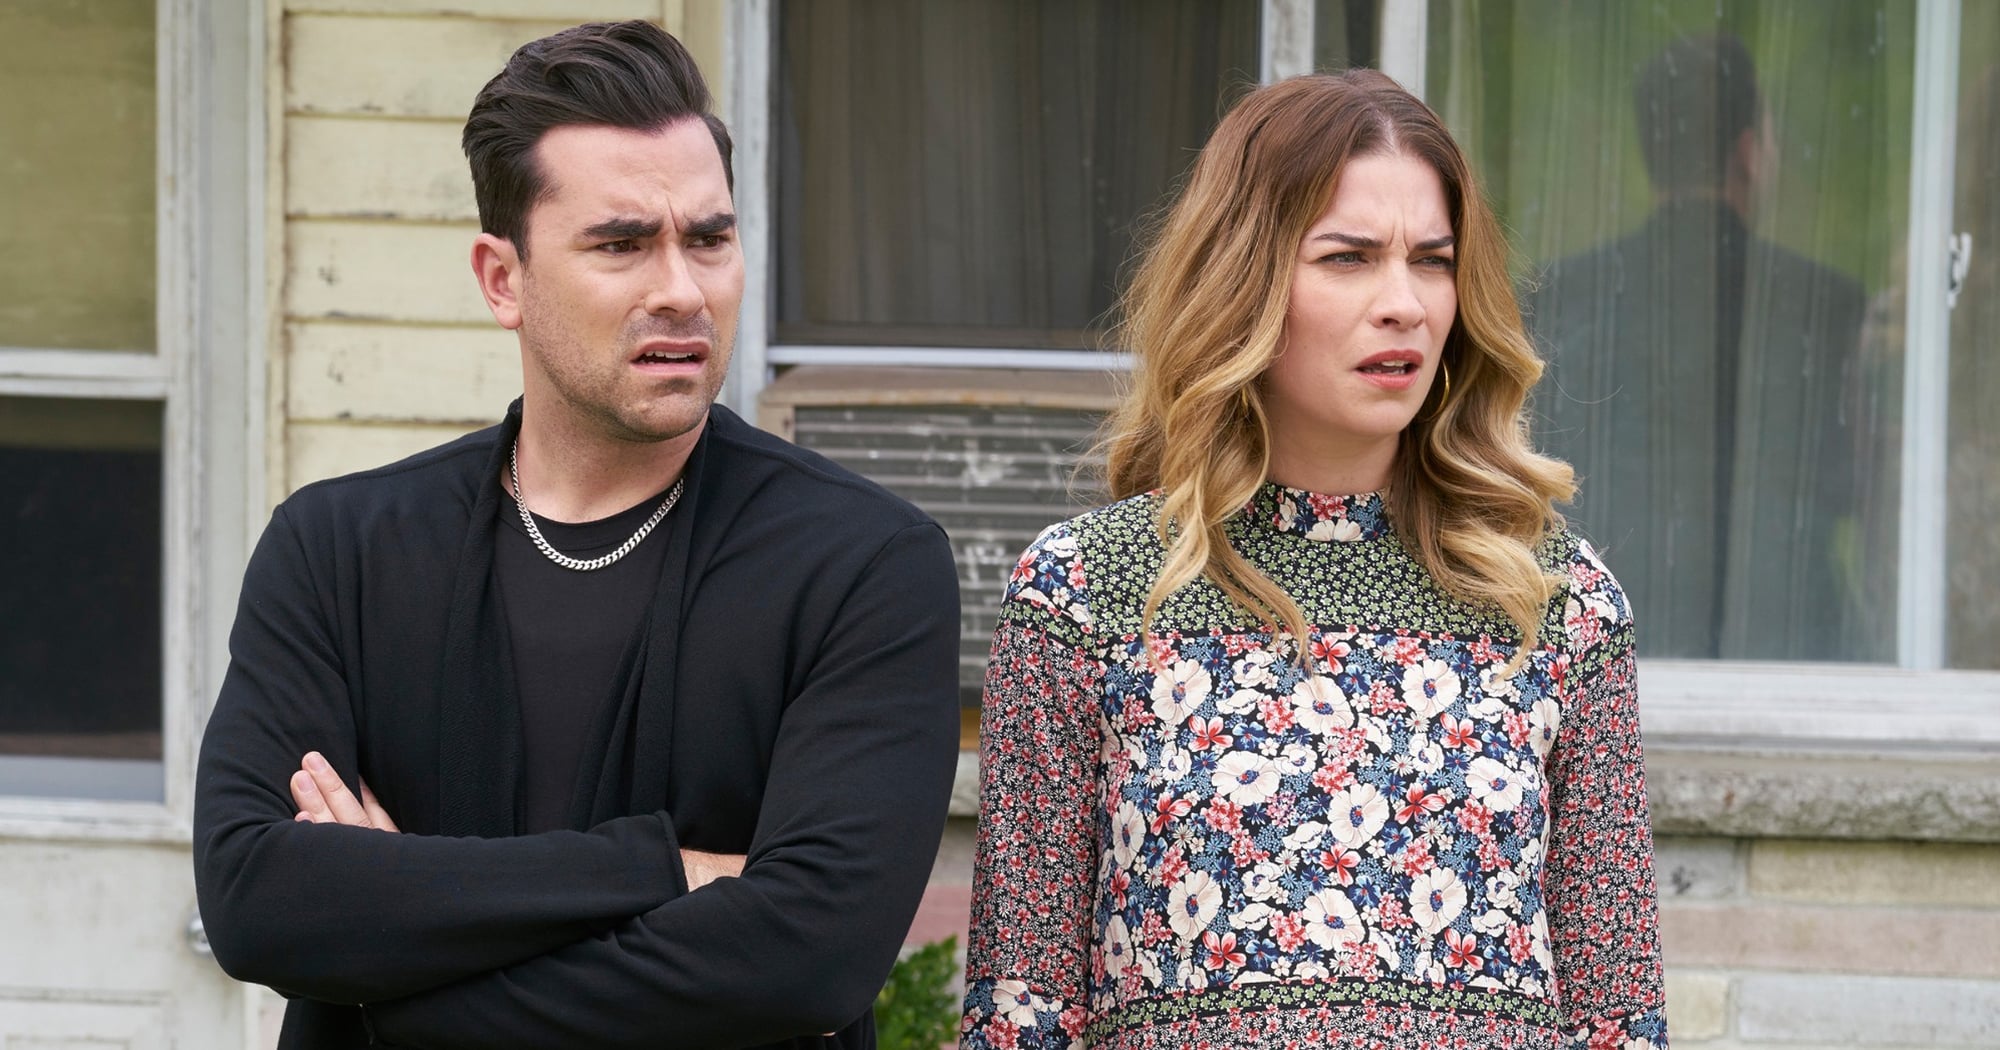 Schitt's Creek Just Dropped The Jam of the Year with A Little Bit Alexis